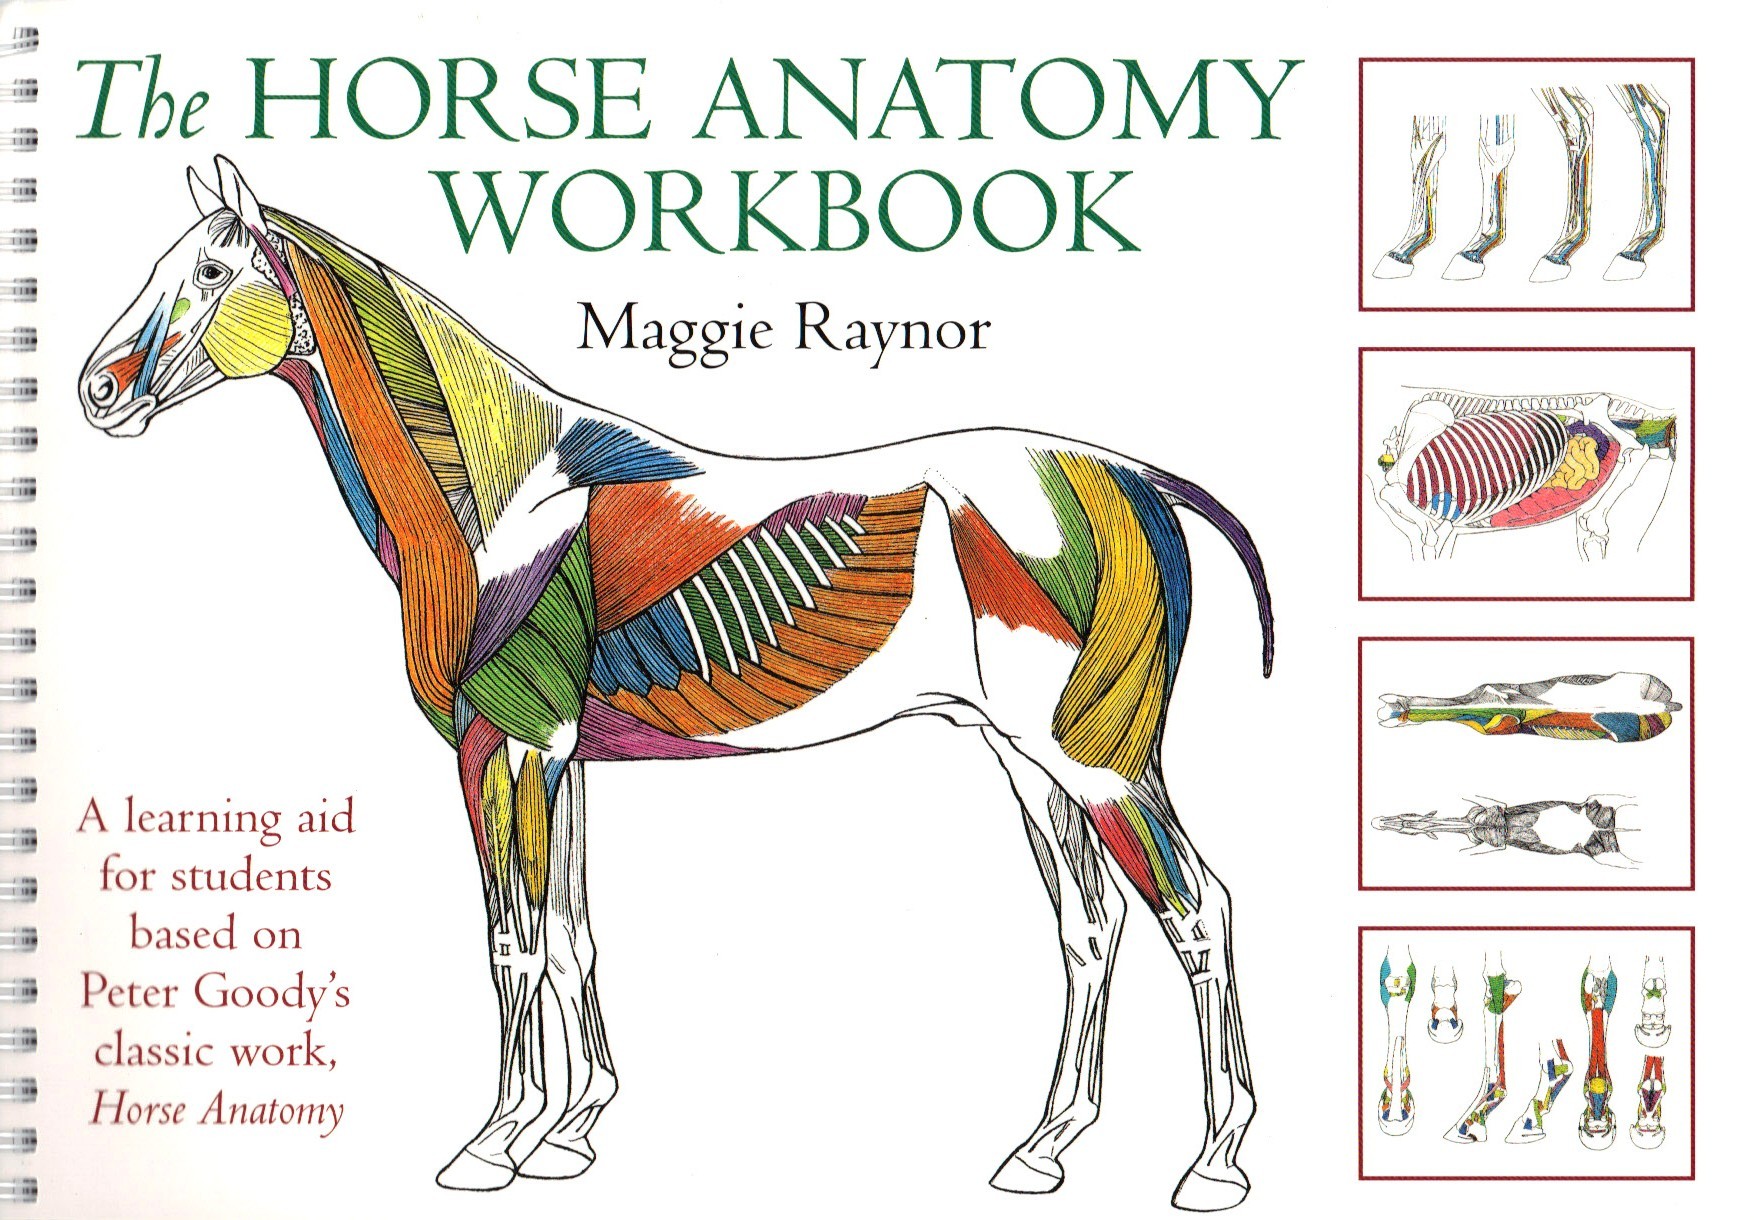 The Horse Anatomy Workbook by Maggie Raynor | trot-online